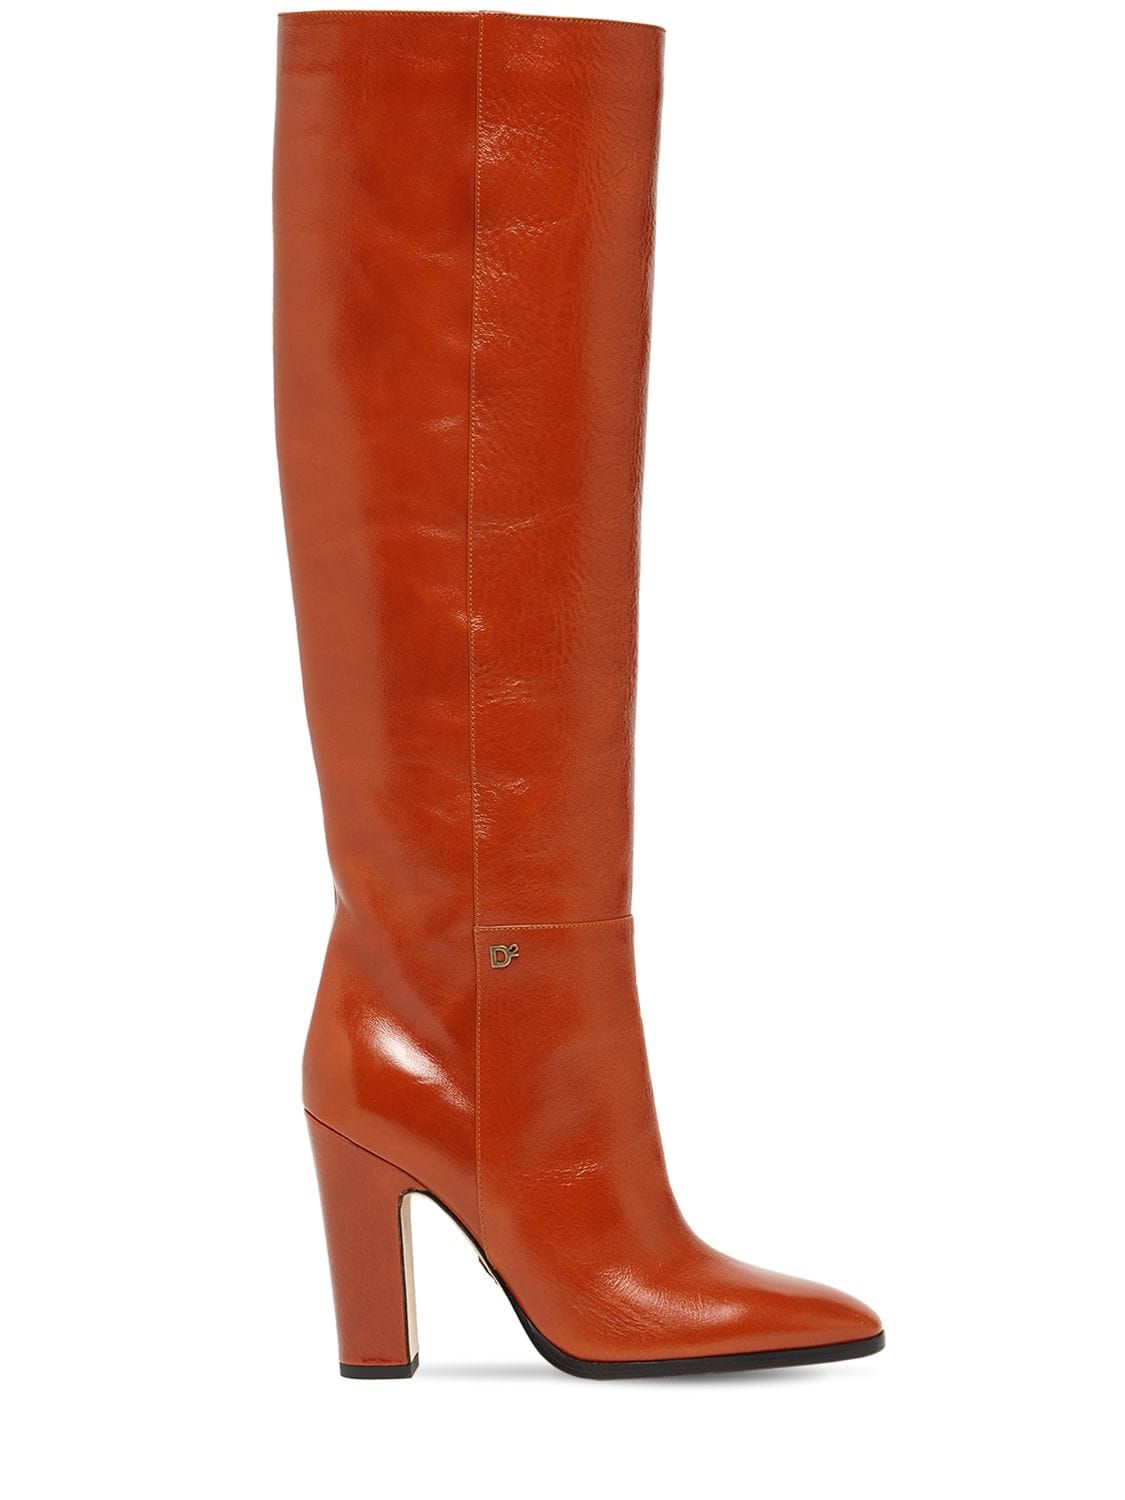 DSQUARED2 100mm Polished Leather Tall Boots